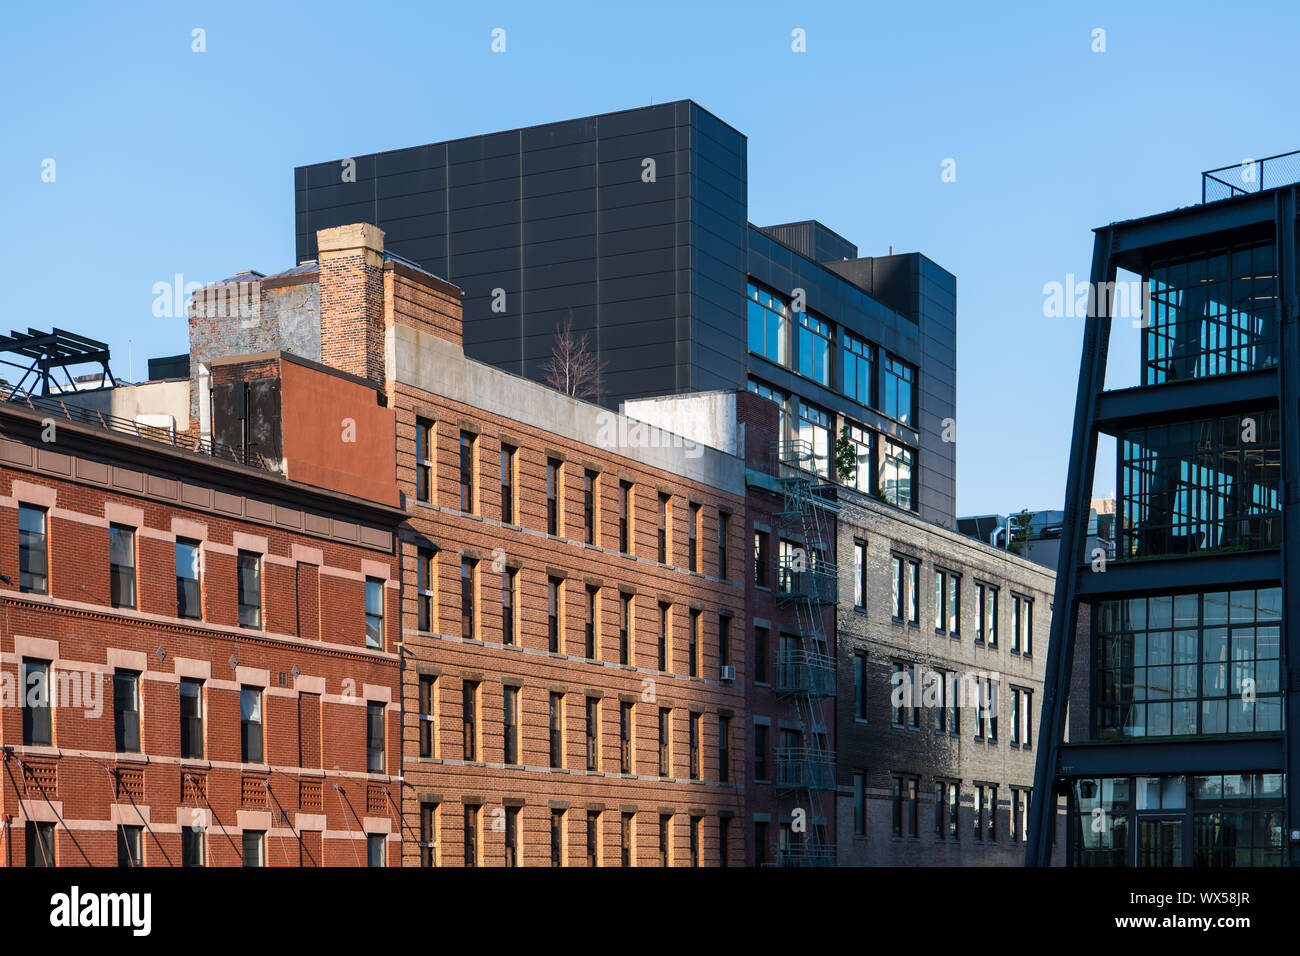 Old brick buildings contrasted with modern glass and steel architecture near The High Line in New York City Stock Photo